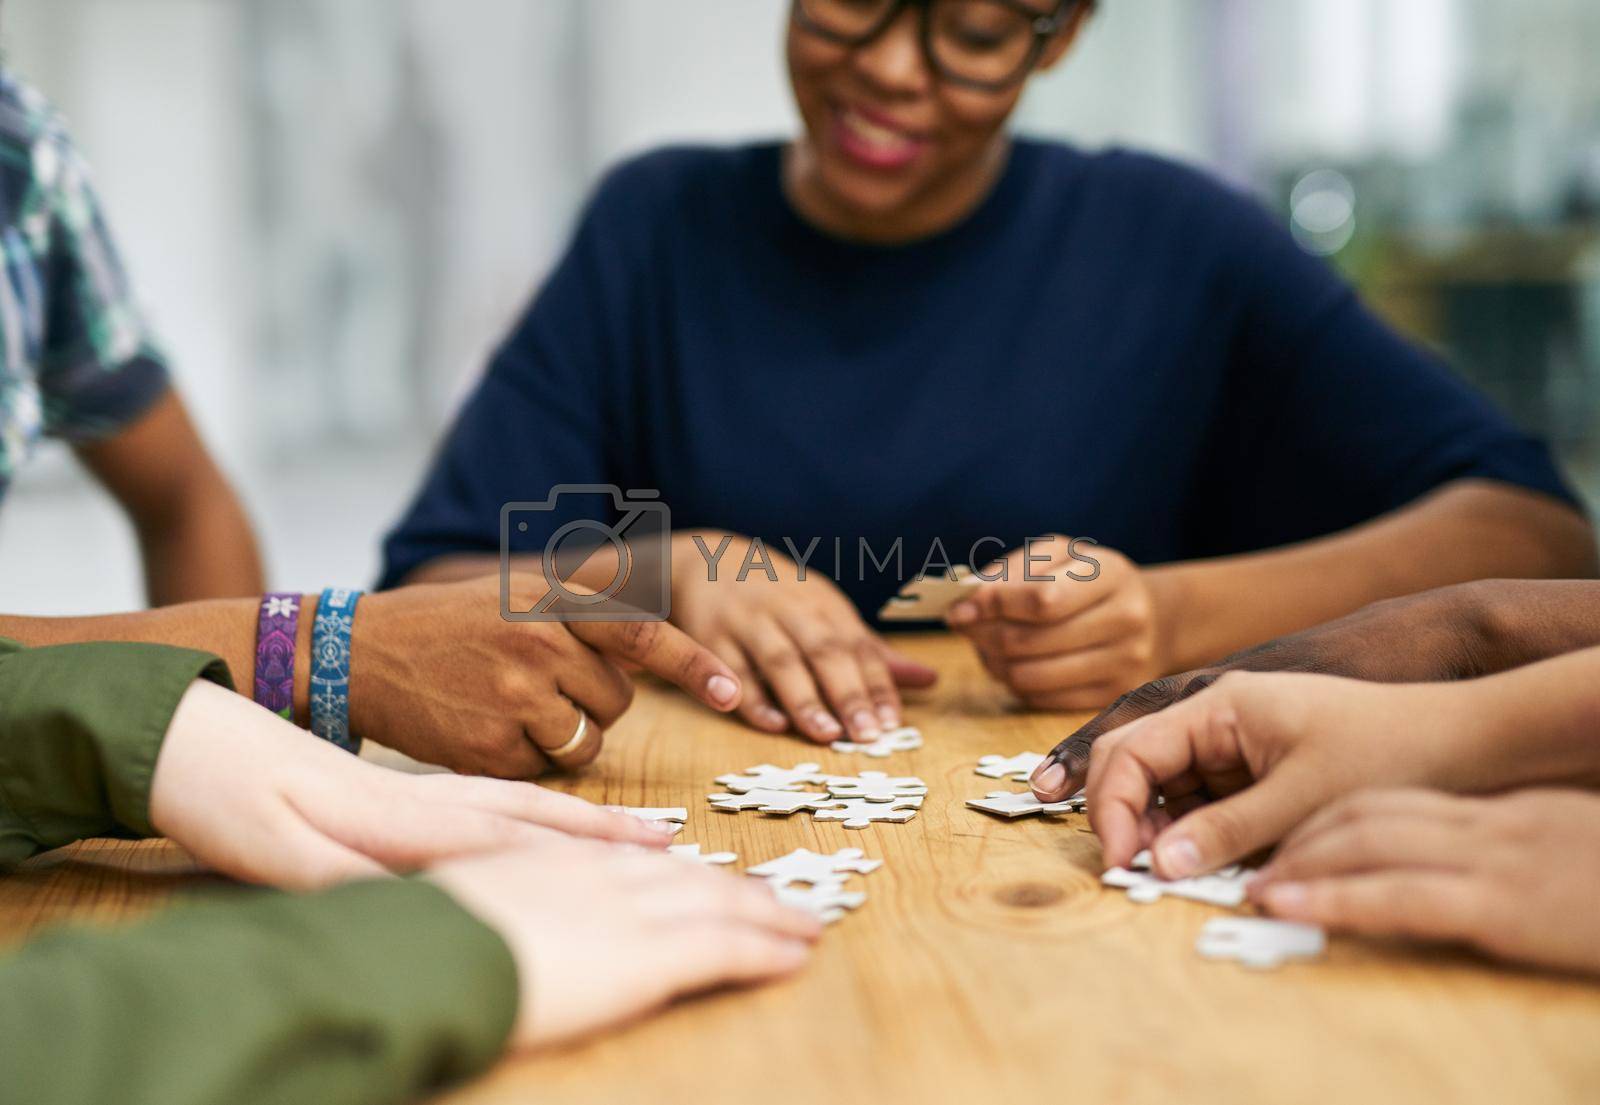 Shot of a group of people building a puzzle together.